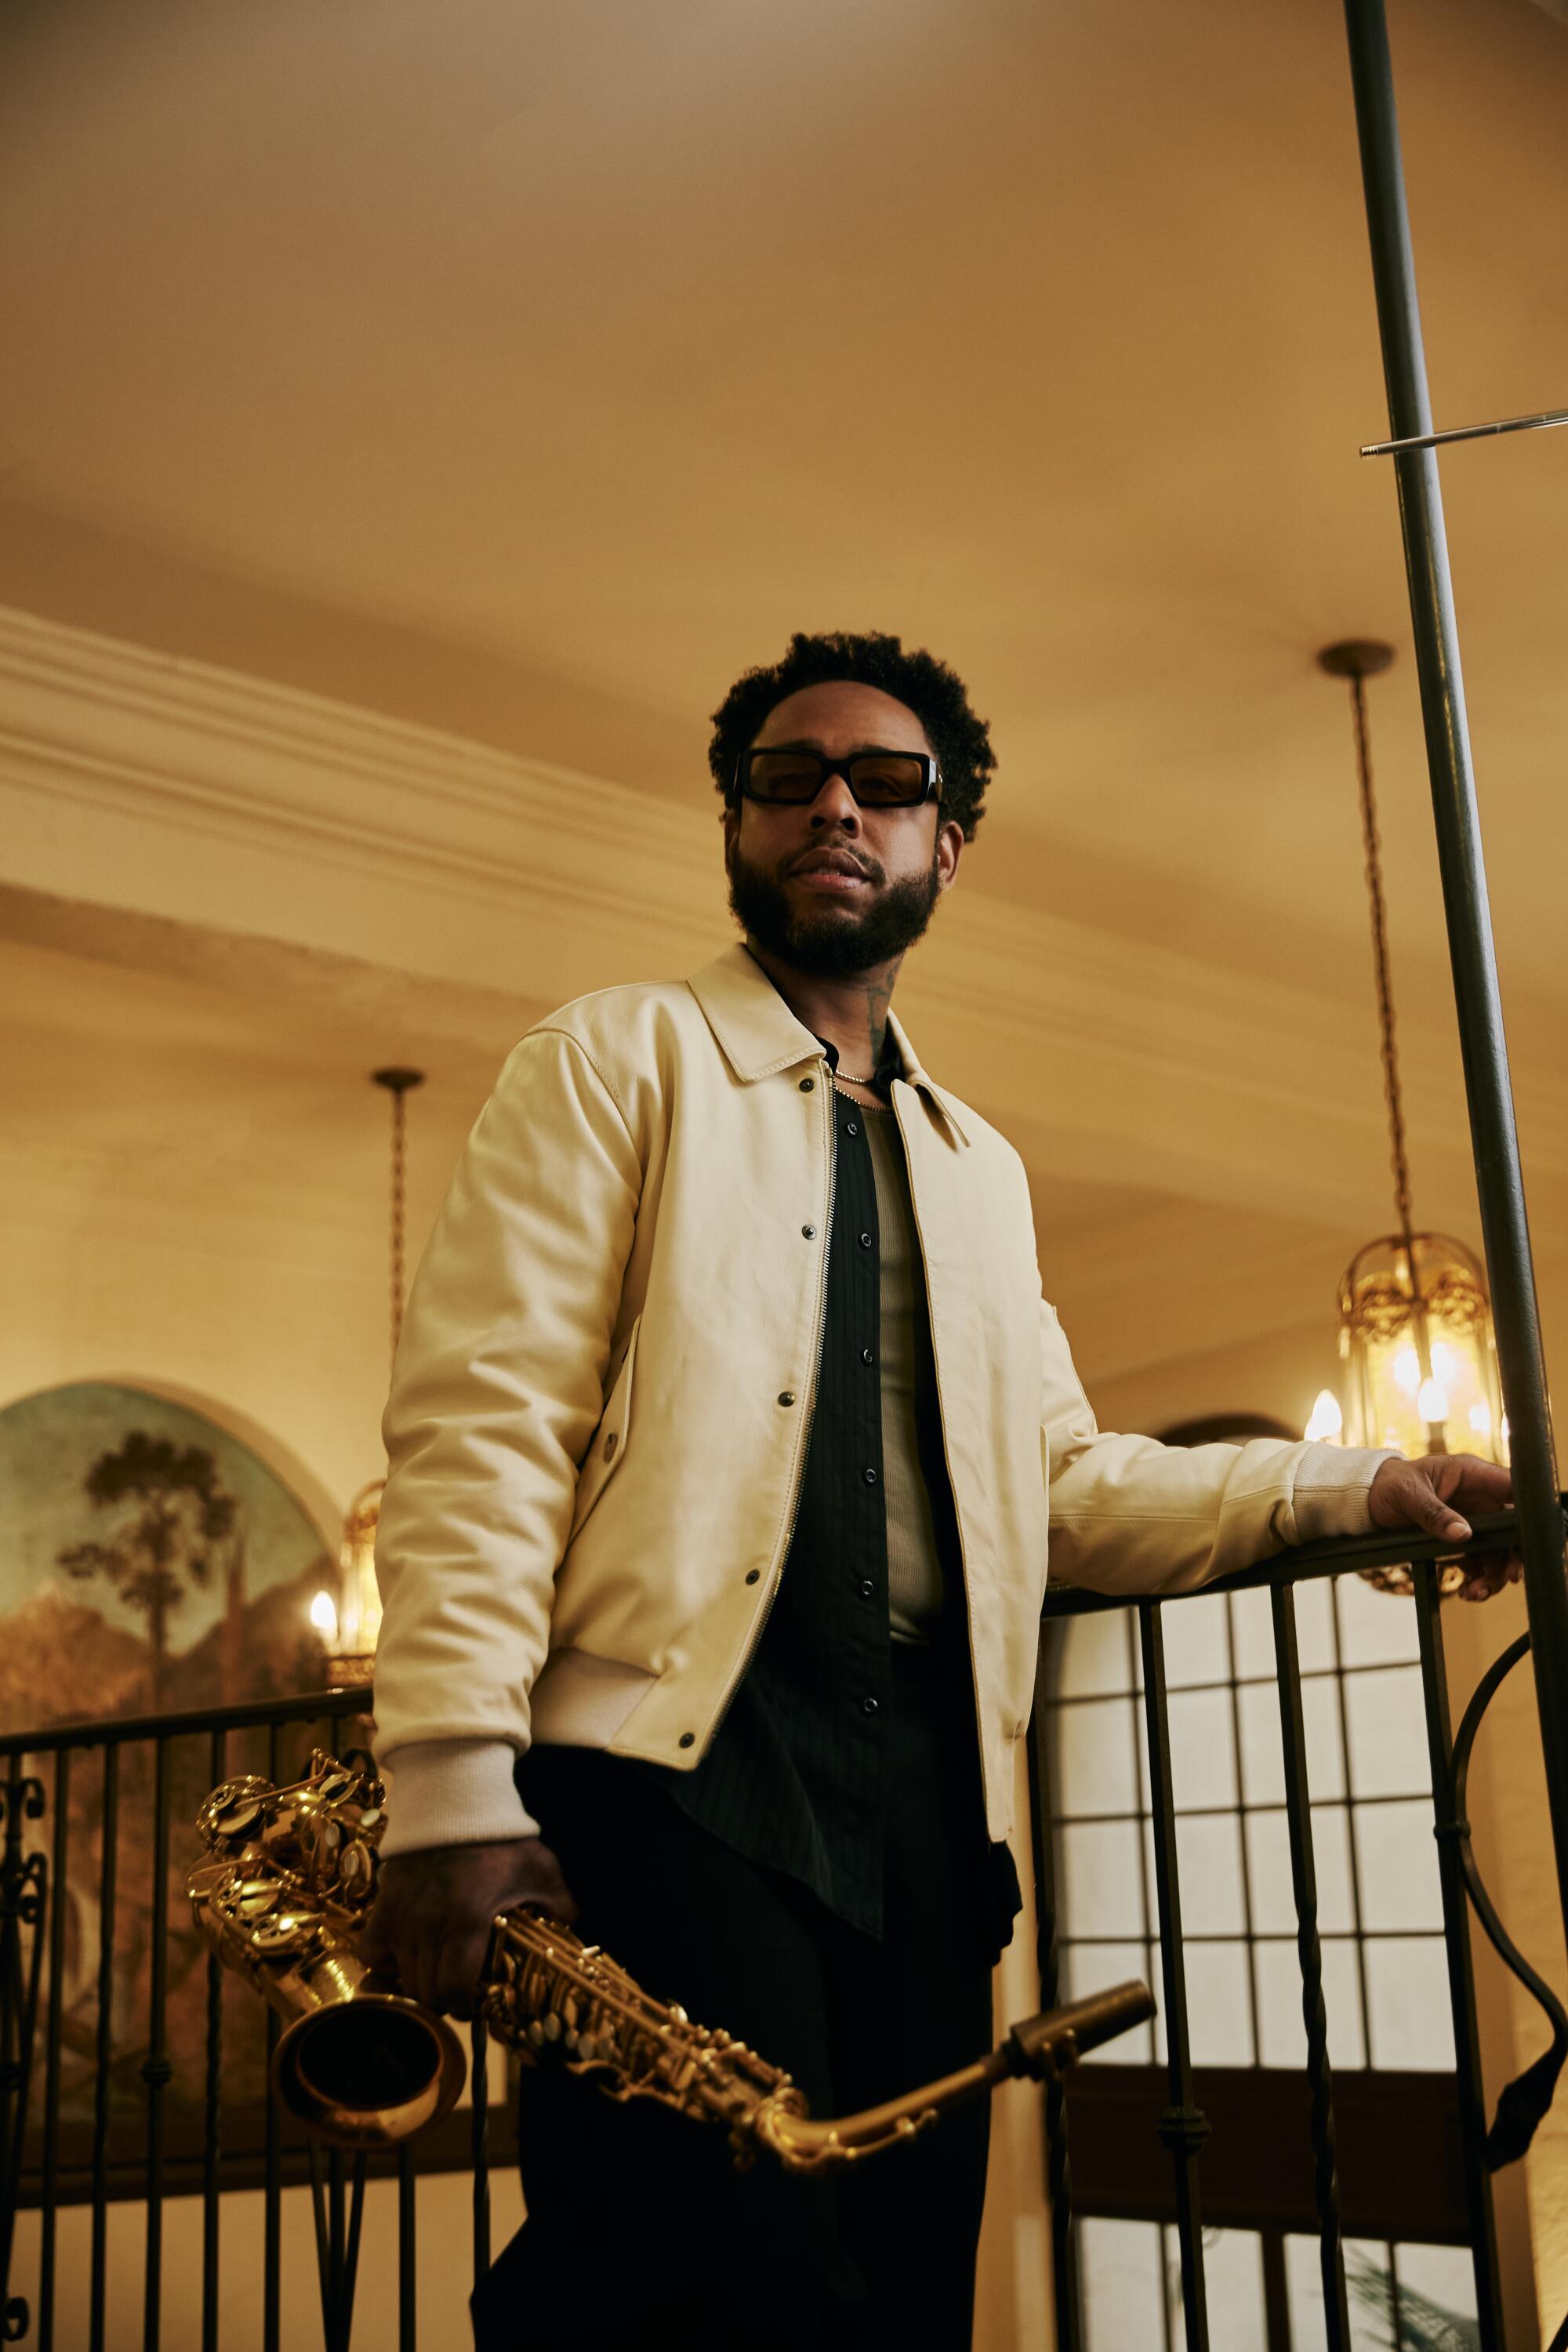 Terrace Martin stands holding a saxophone